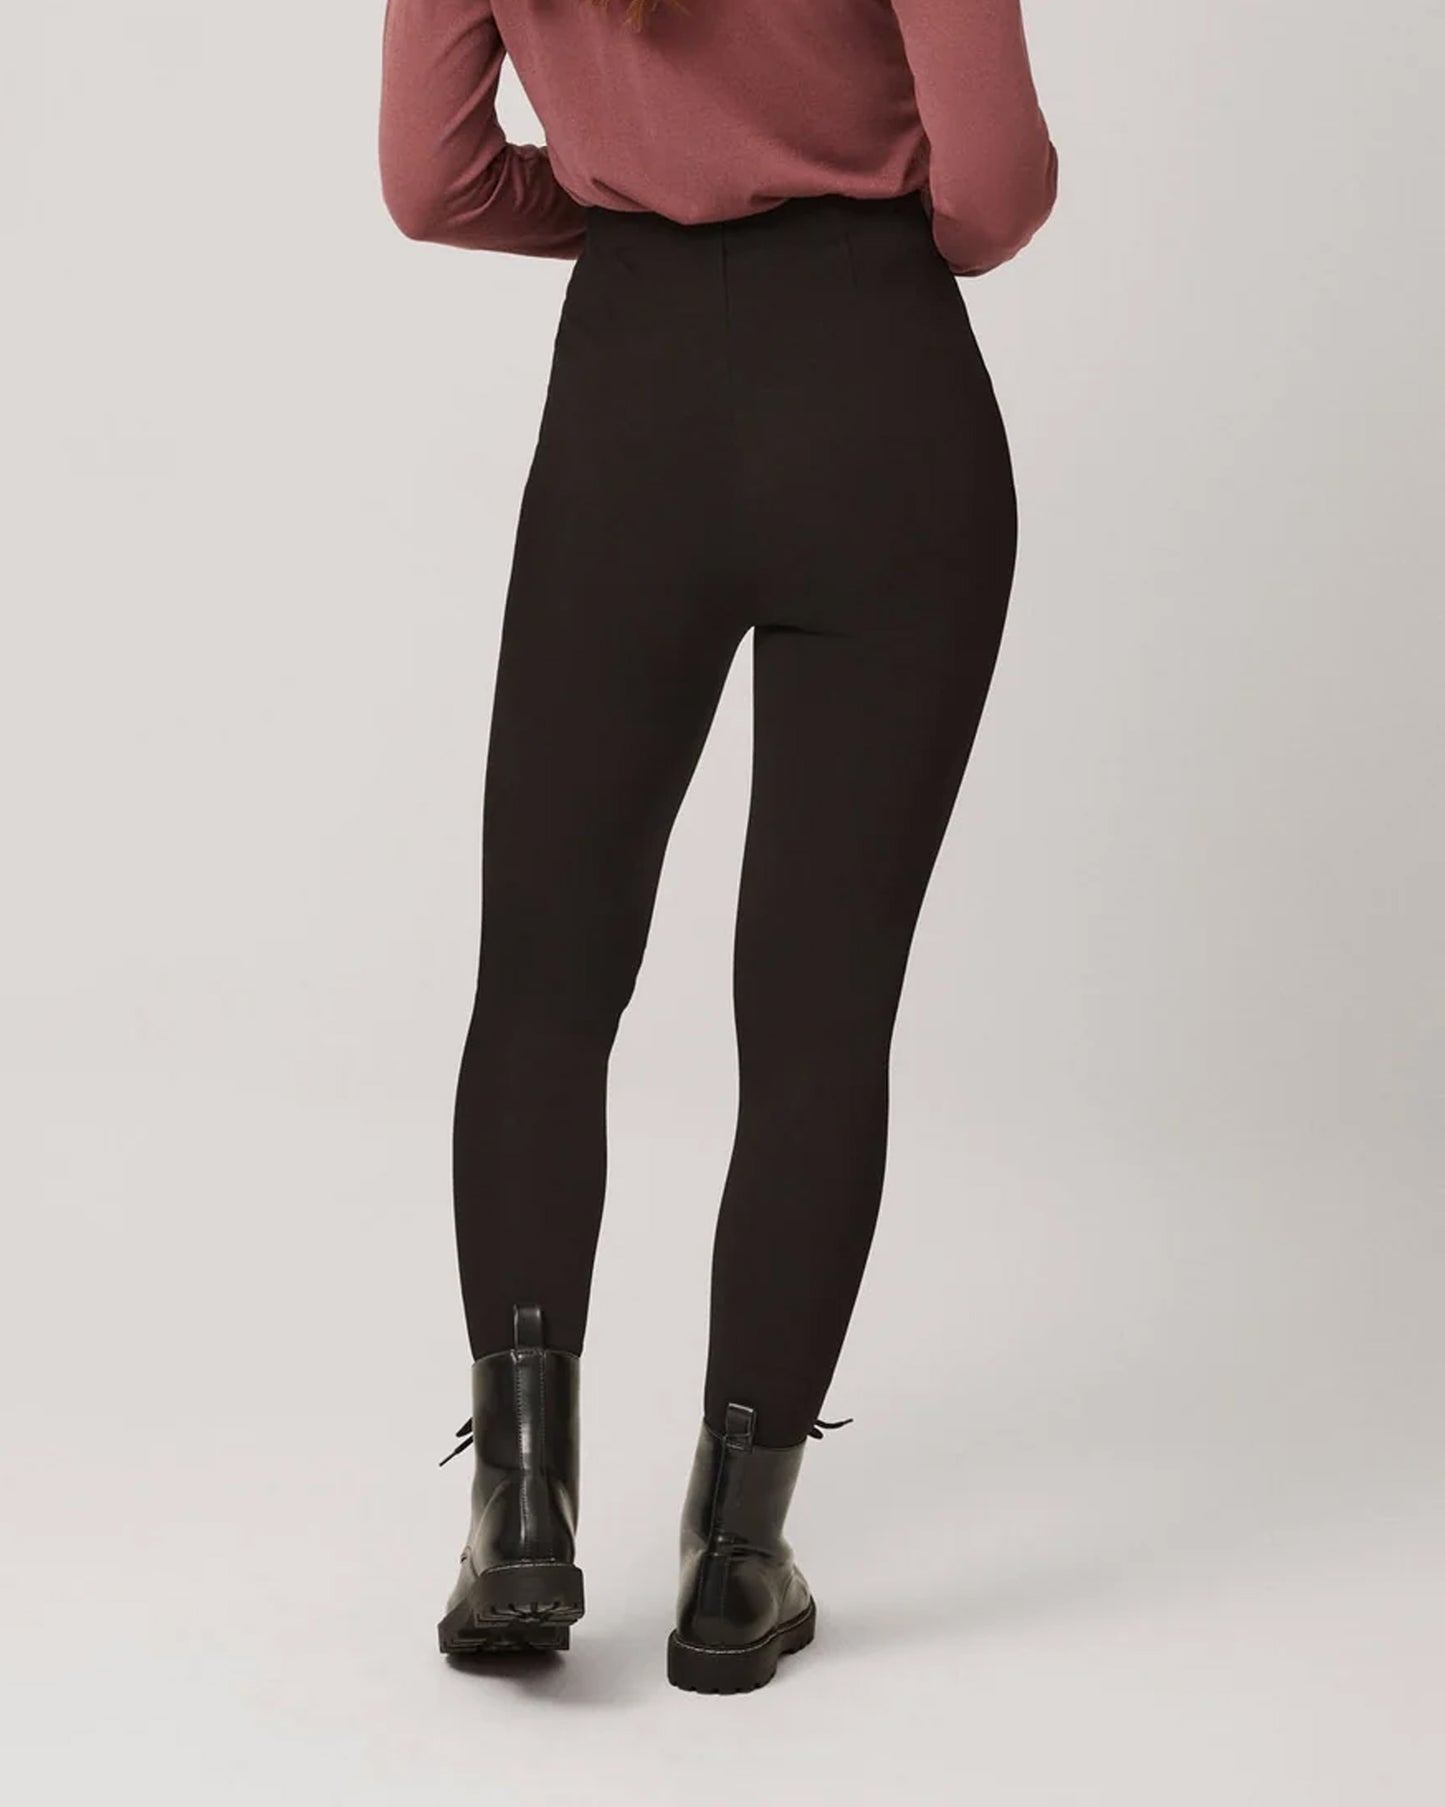 Ysabel Mora 70290 High Rise Treggings - Black high waisted trouser leggings (treggings) with shaped darted waist, worn with dirty pink top and black boots.